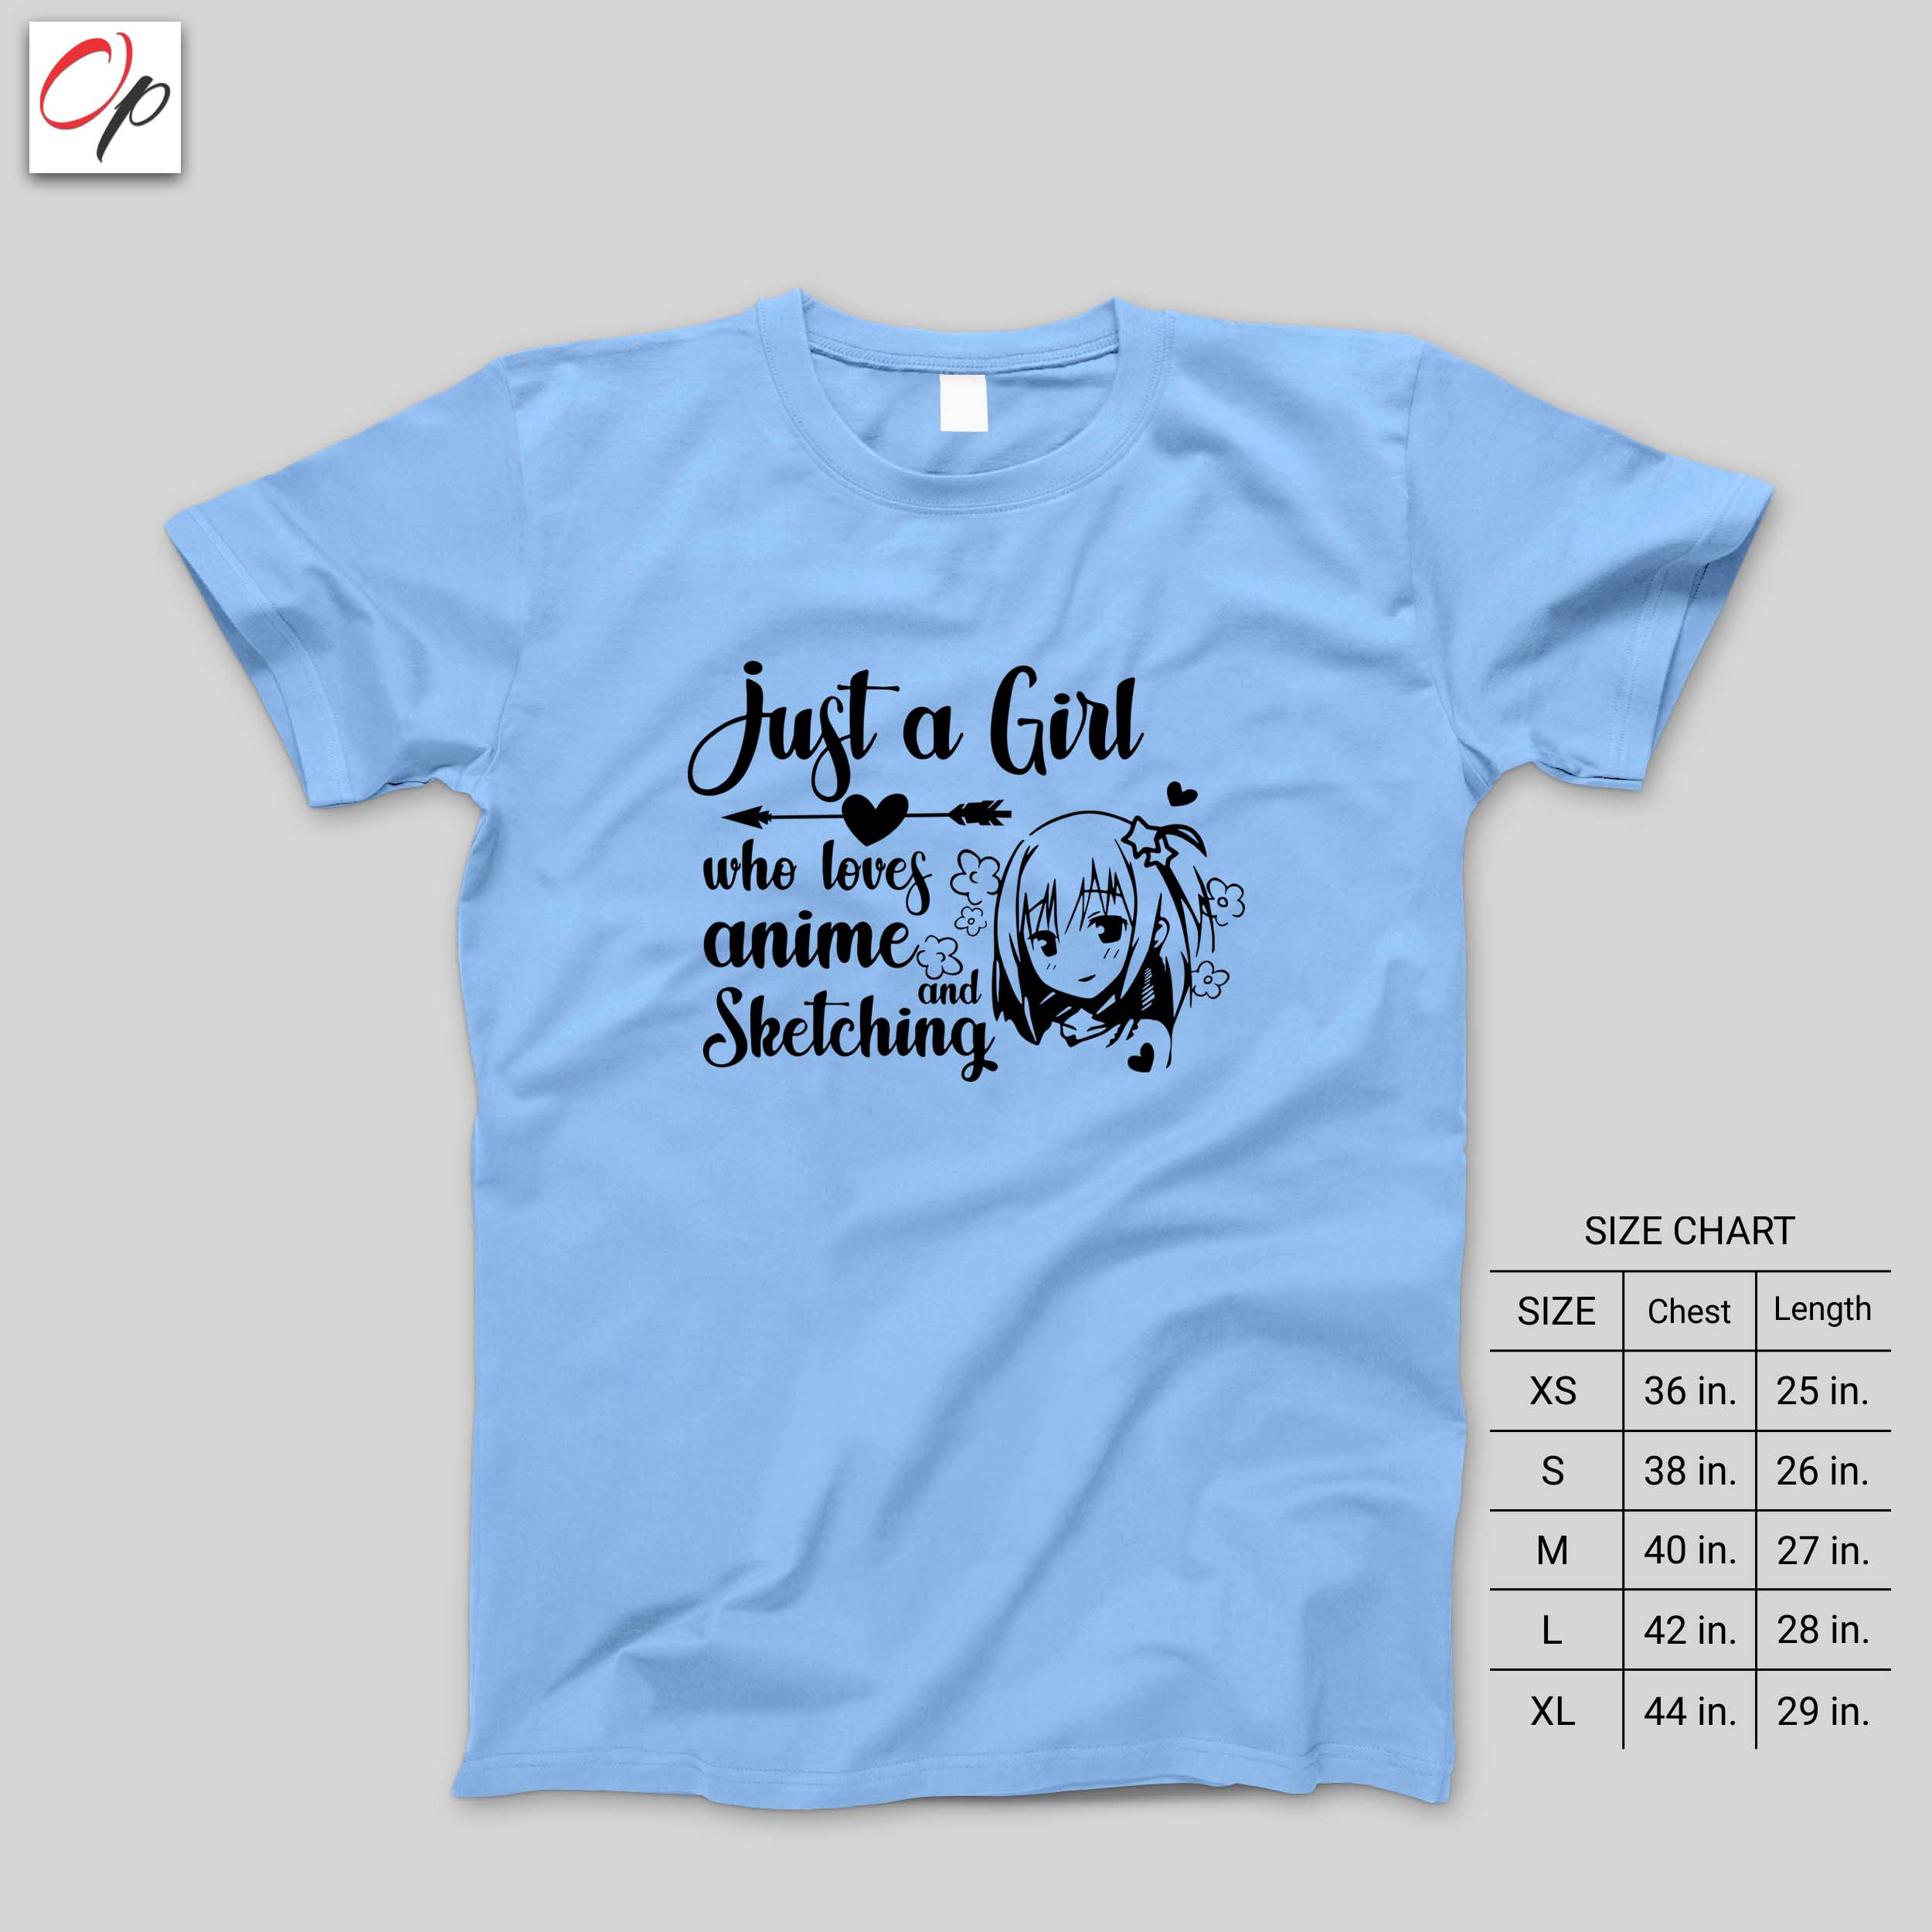 Details more than 151 funny anime shirts super hot - awesomeenglish.edu.vn